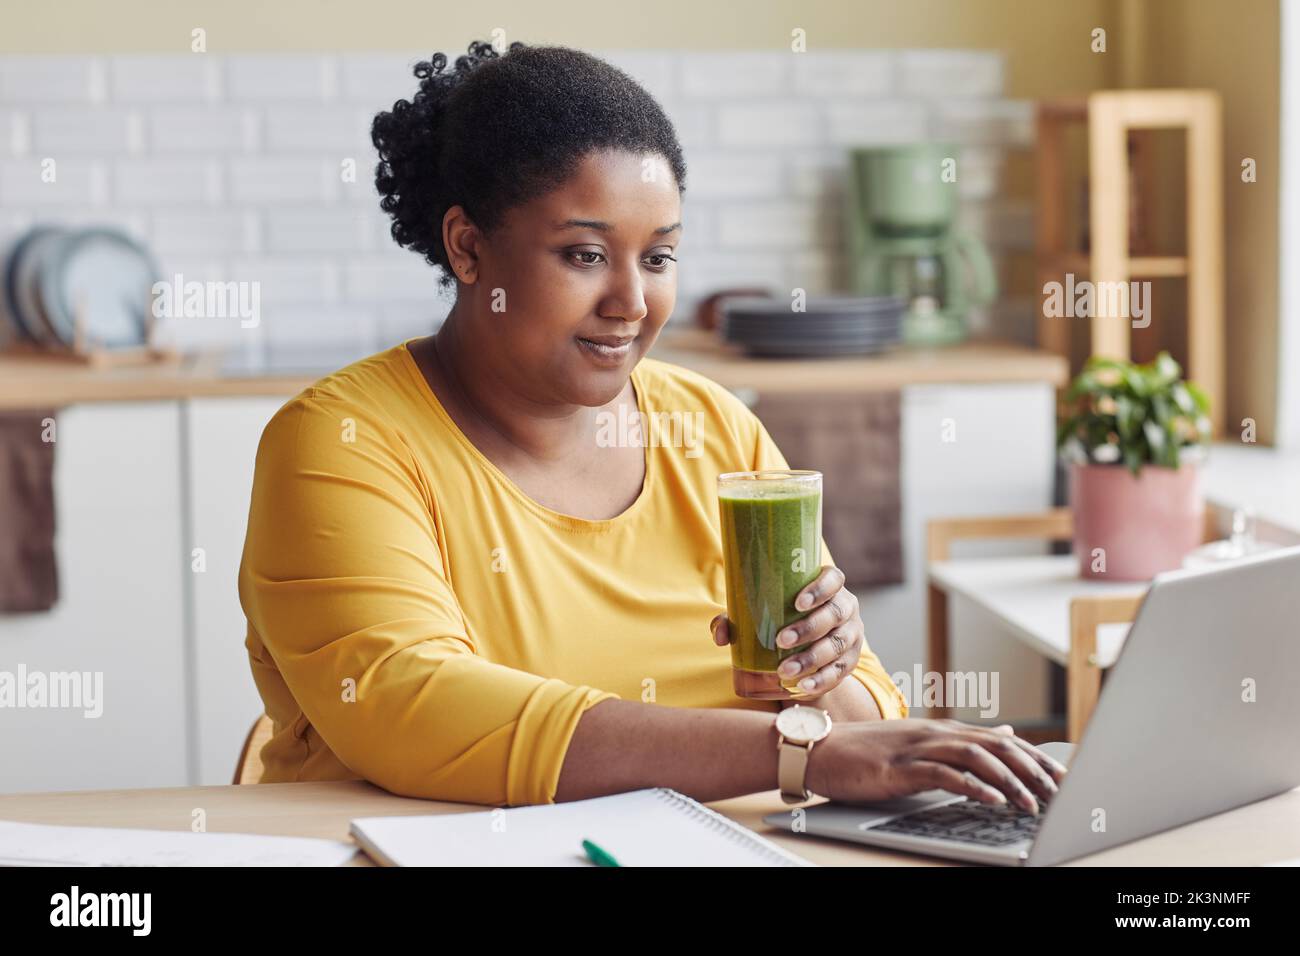 Portrait of overweight black woman drinking smoothie and using laptop at home Stock Photo